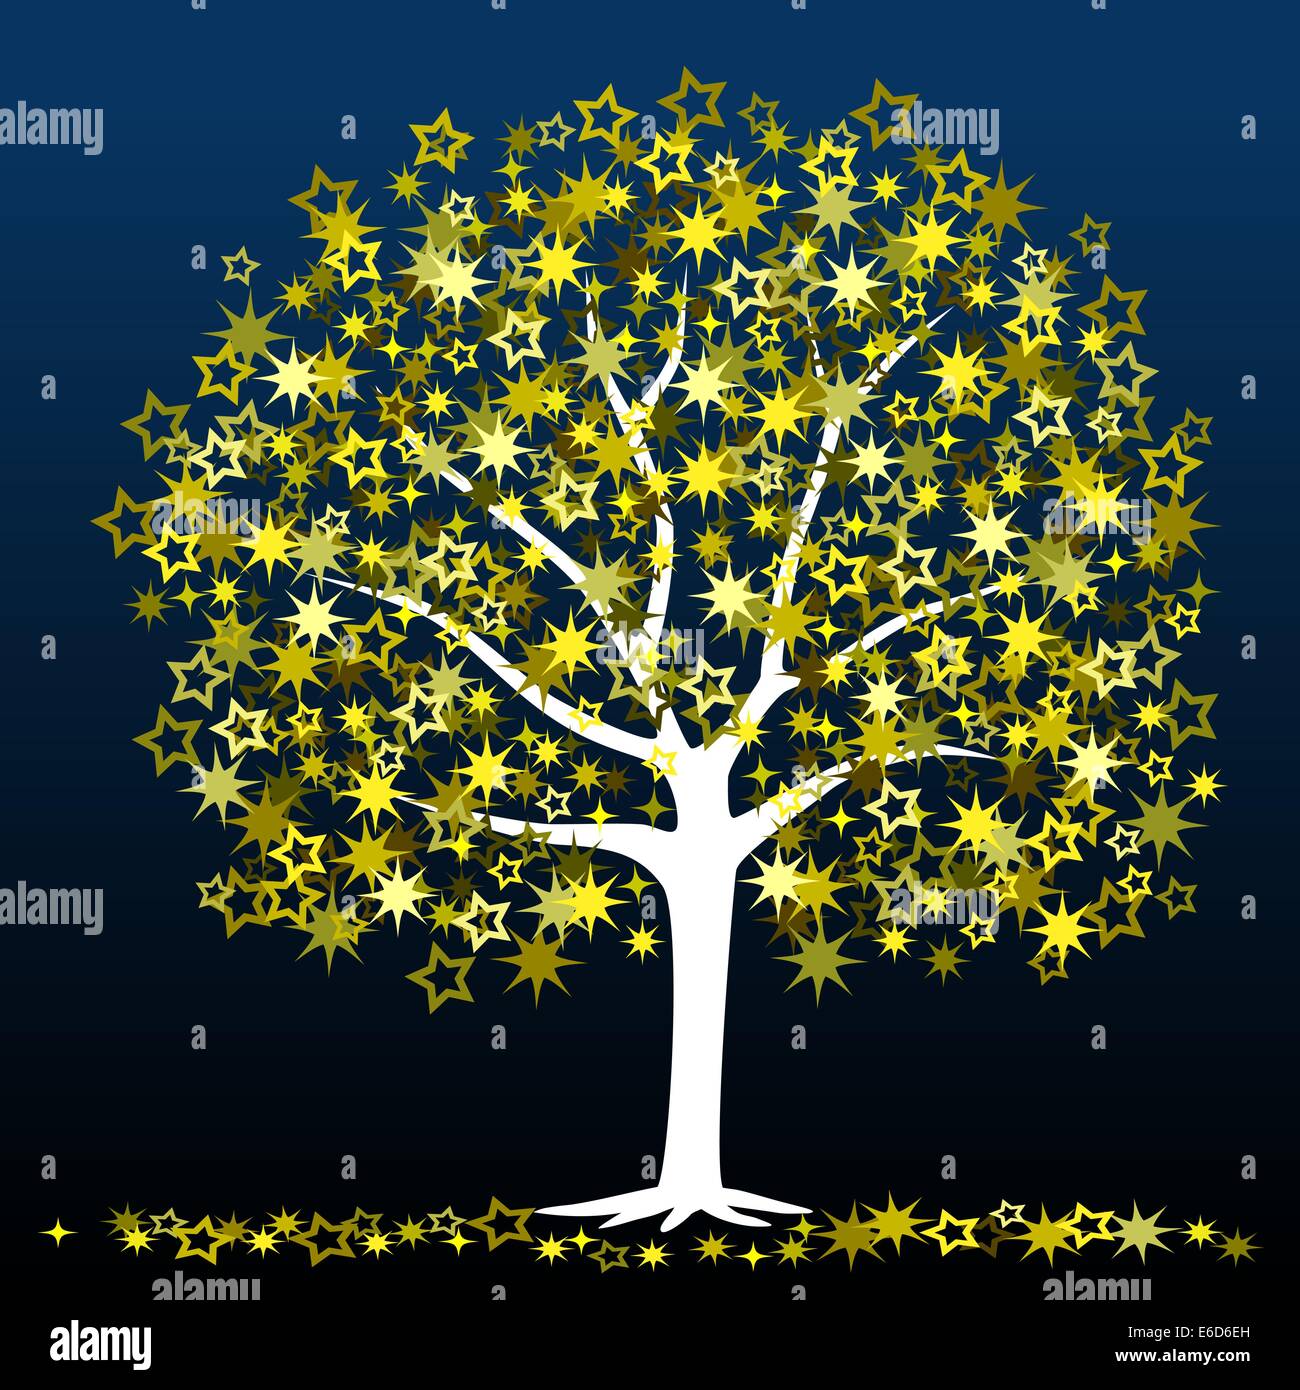 Editable vector illustration of a tree with stars as leaves Stock Vector